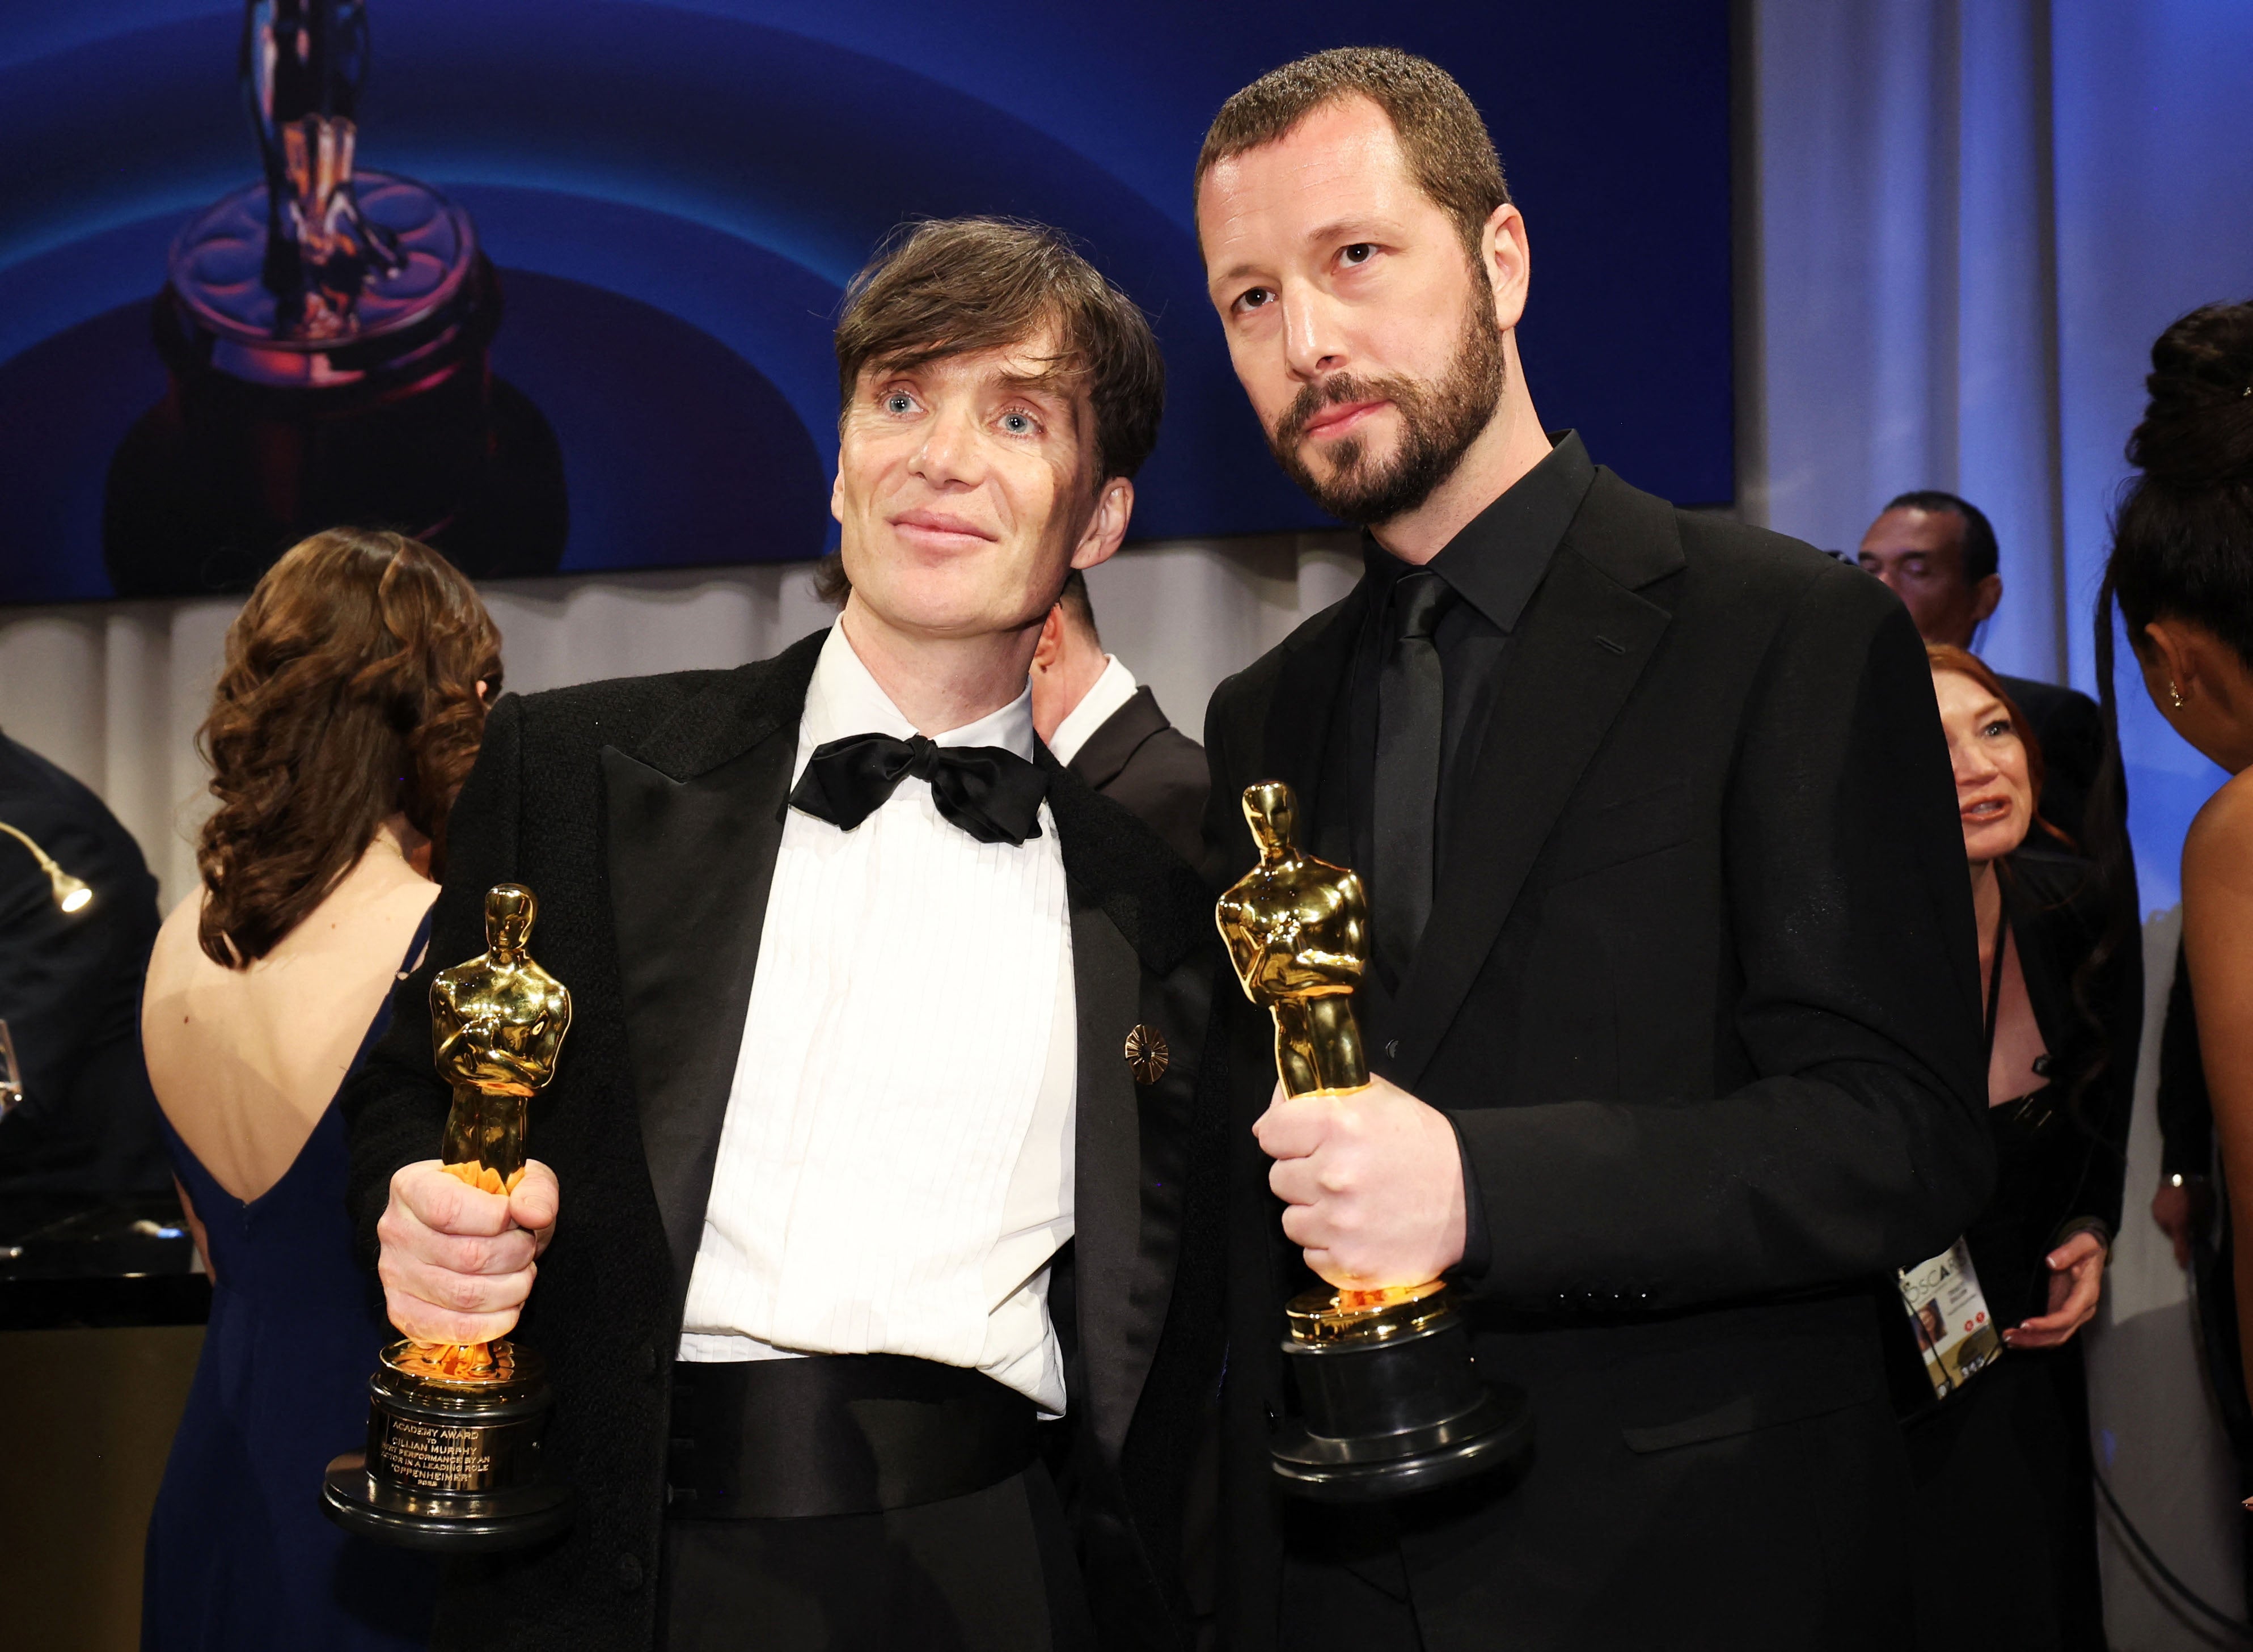 Mstyslav Chernov, winner of the Oscar for Best Documentary Feature Film for "20 Days in Mariupol" and Cillian Murphy, winner of the Best Actor Oscar for "Oppenheimer", pose at the Governors Ball following the Oscars show